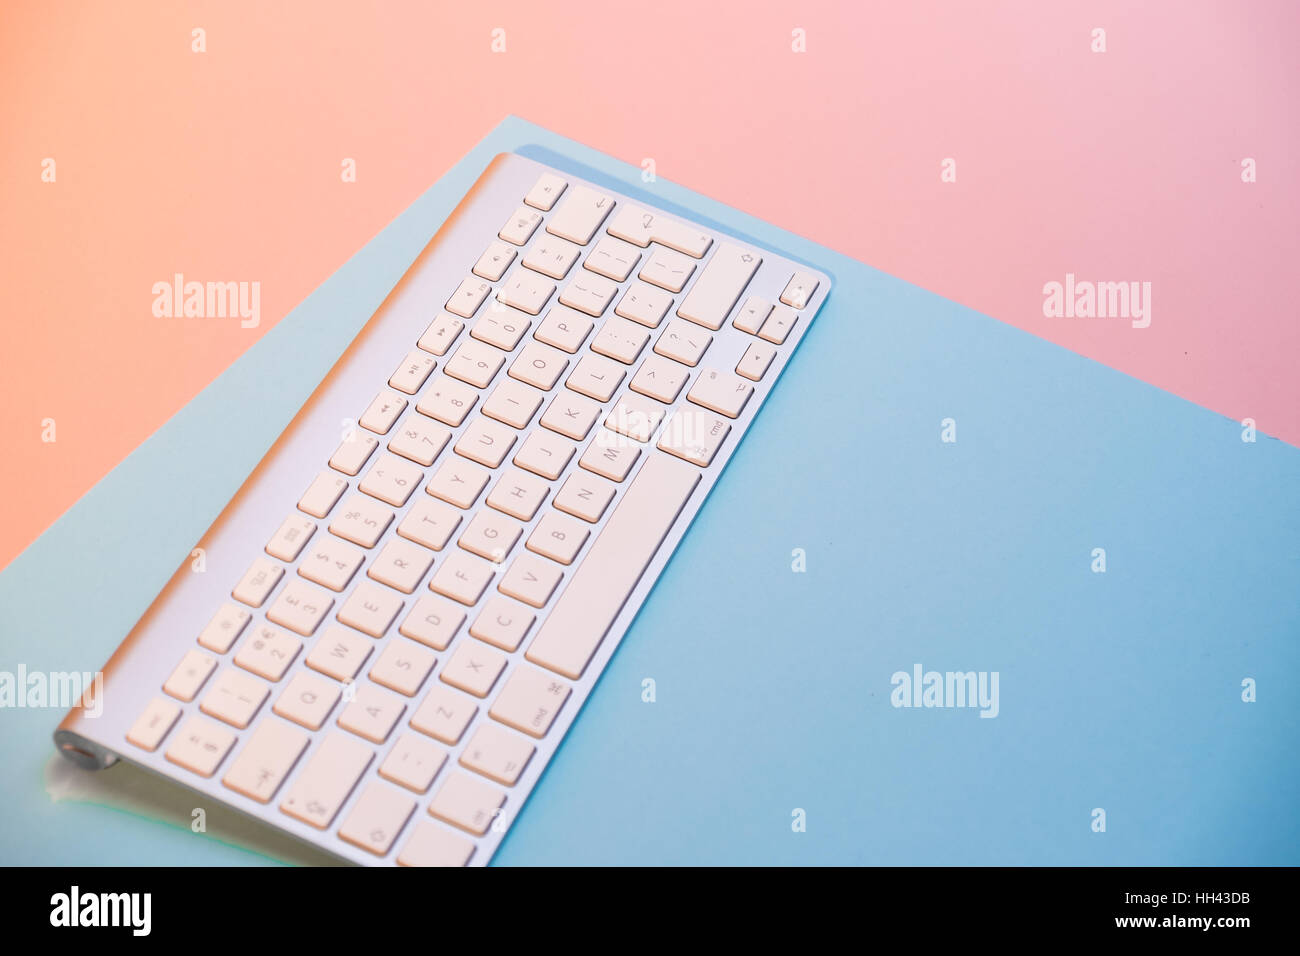 Wireless computer keyboard against pink and aqua backdrop Stock Photo